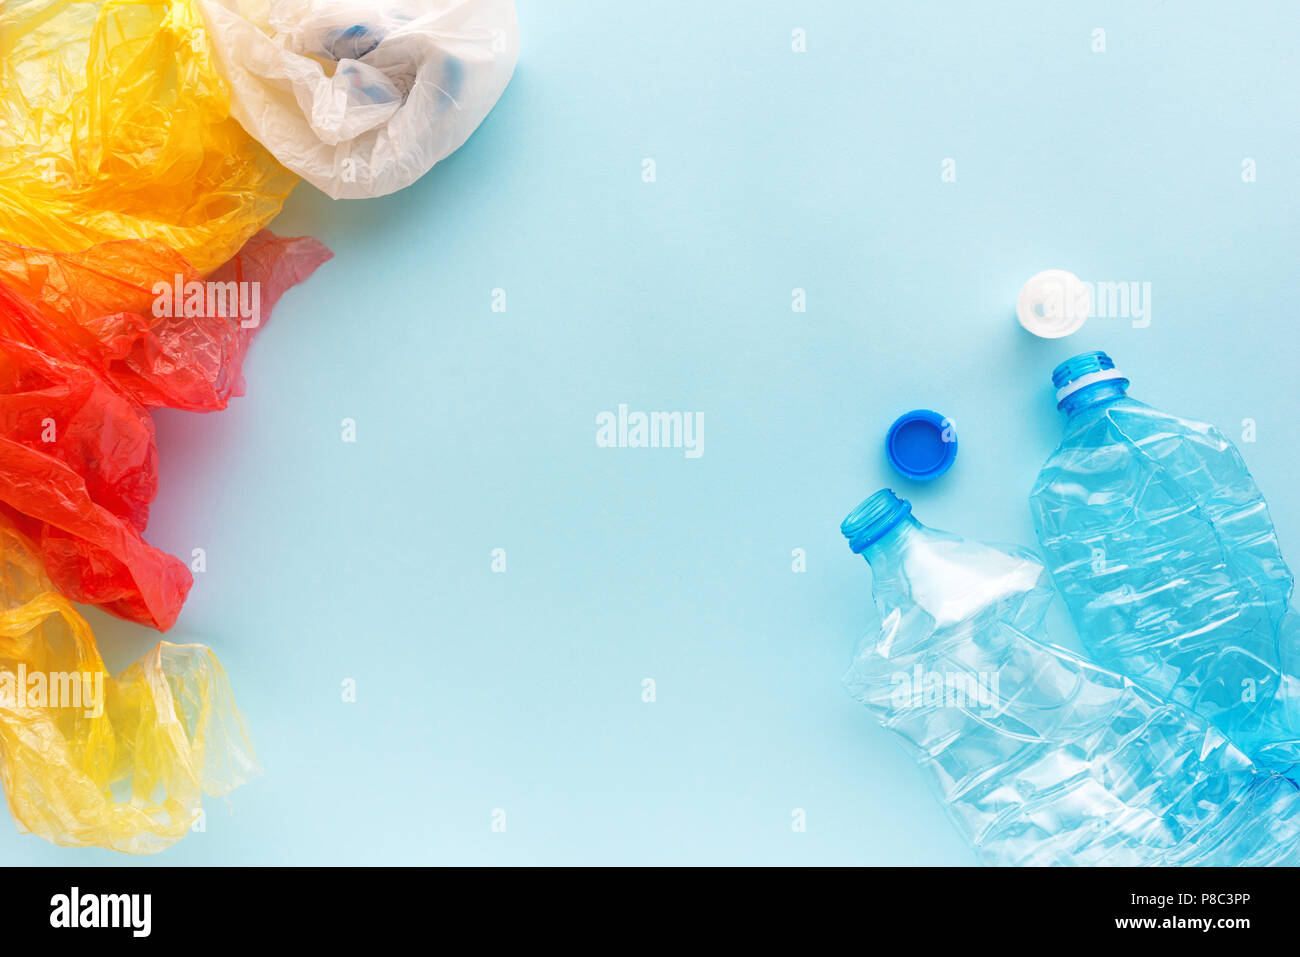 Used plastic bottles and bags for recycling, conceptual image with copy space Stock Photo